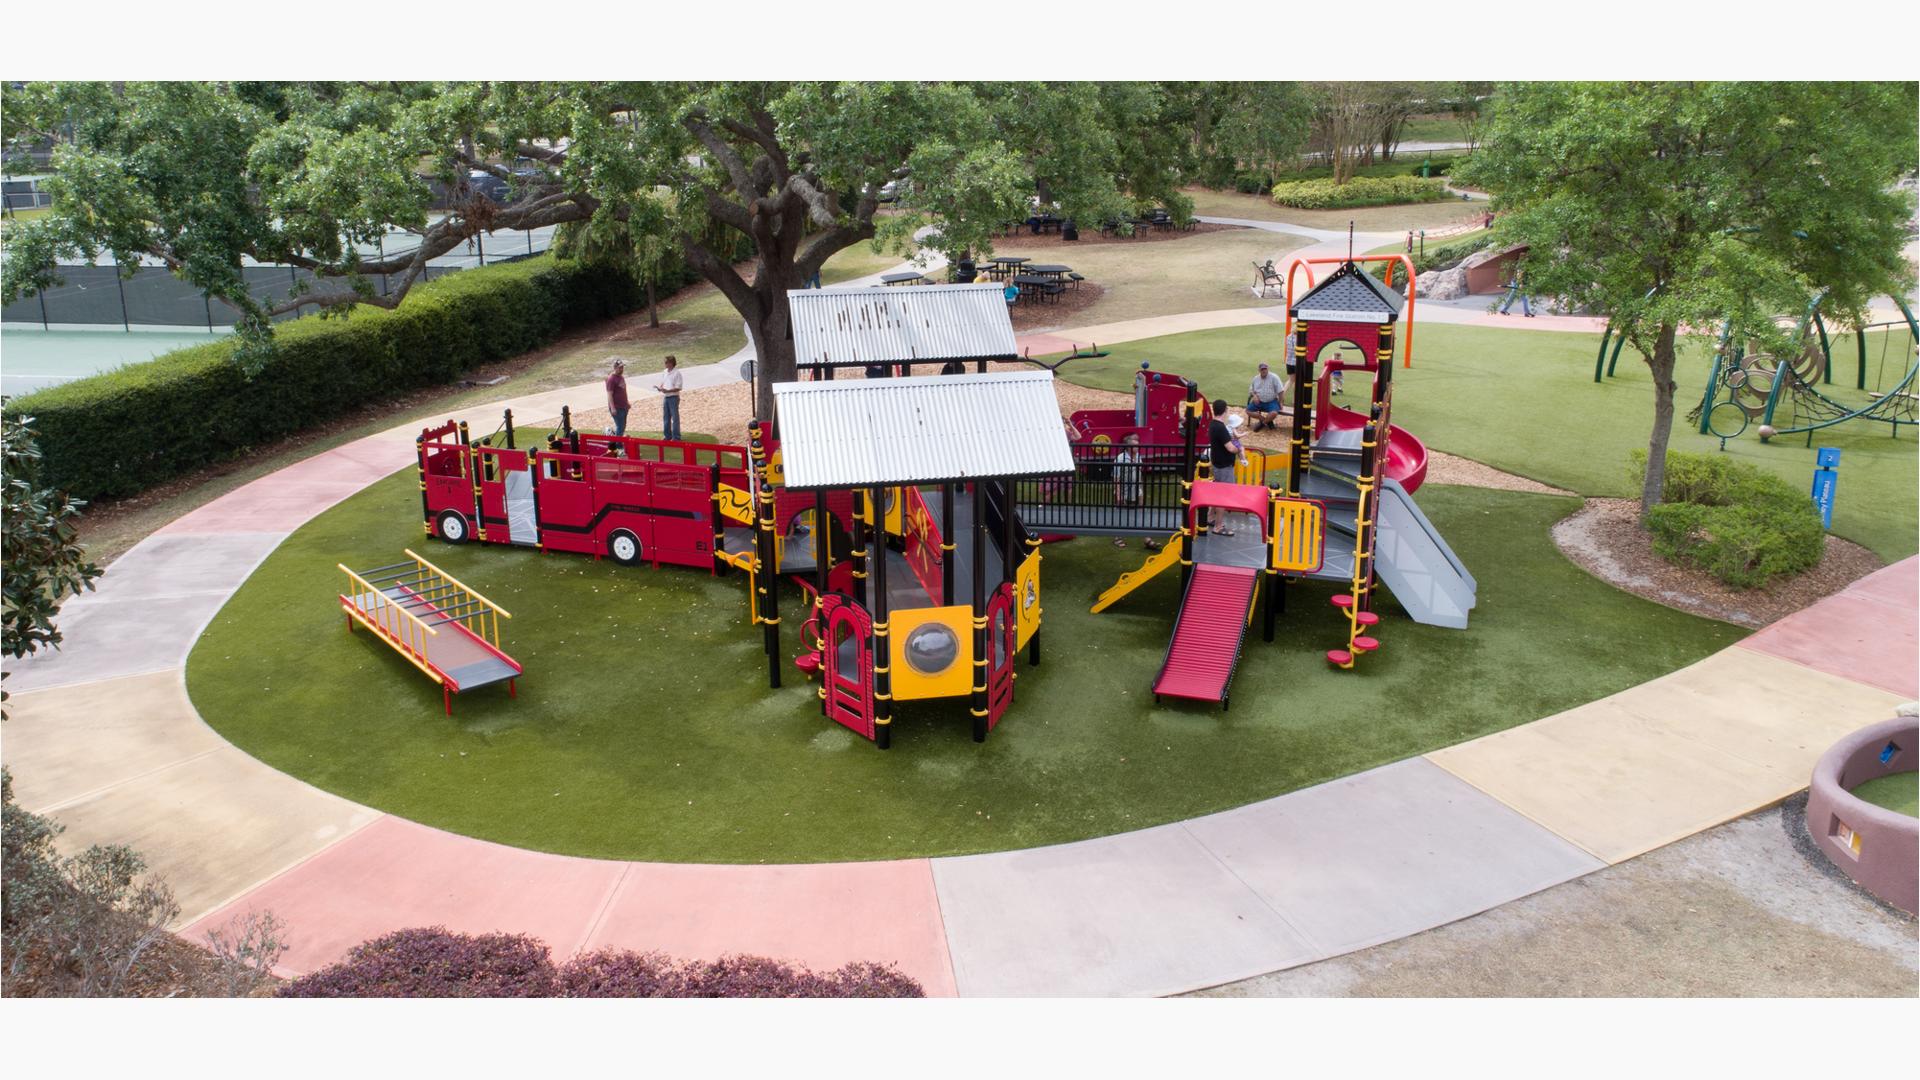 Overview of custom fire station play structure